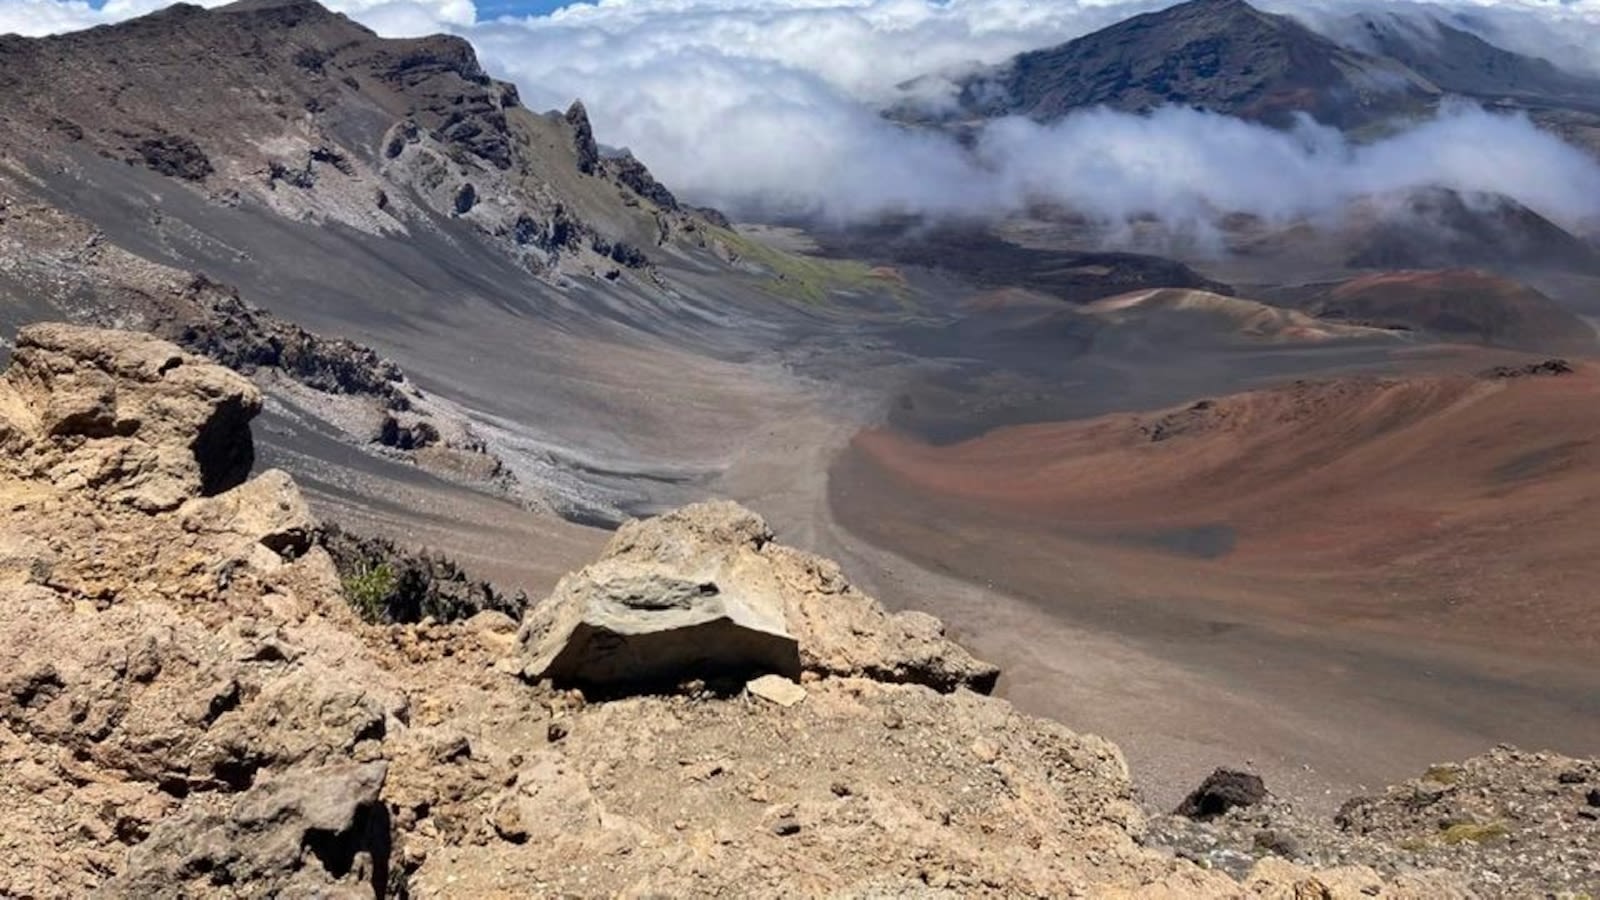 In Hawaii, Maui council opposes US Space Force plan to build new telescopes on Haleakala volcano